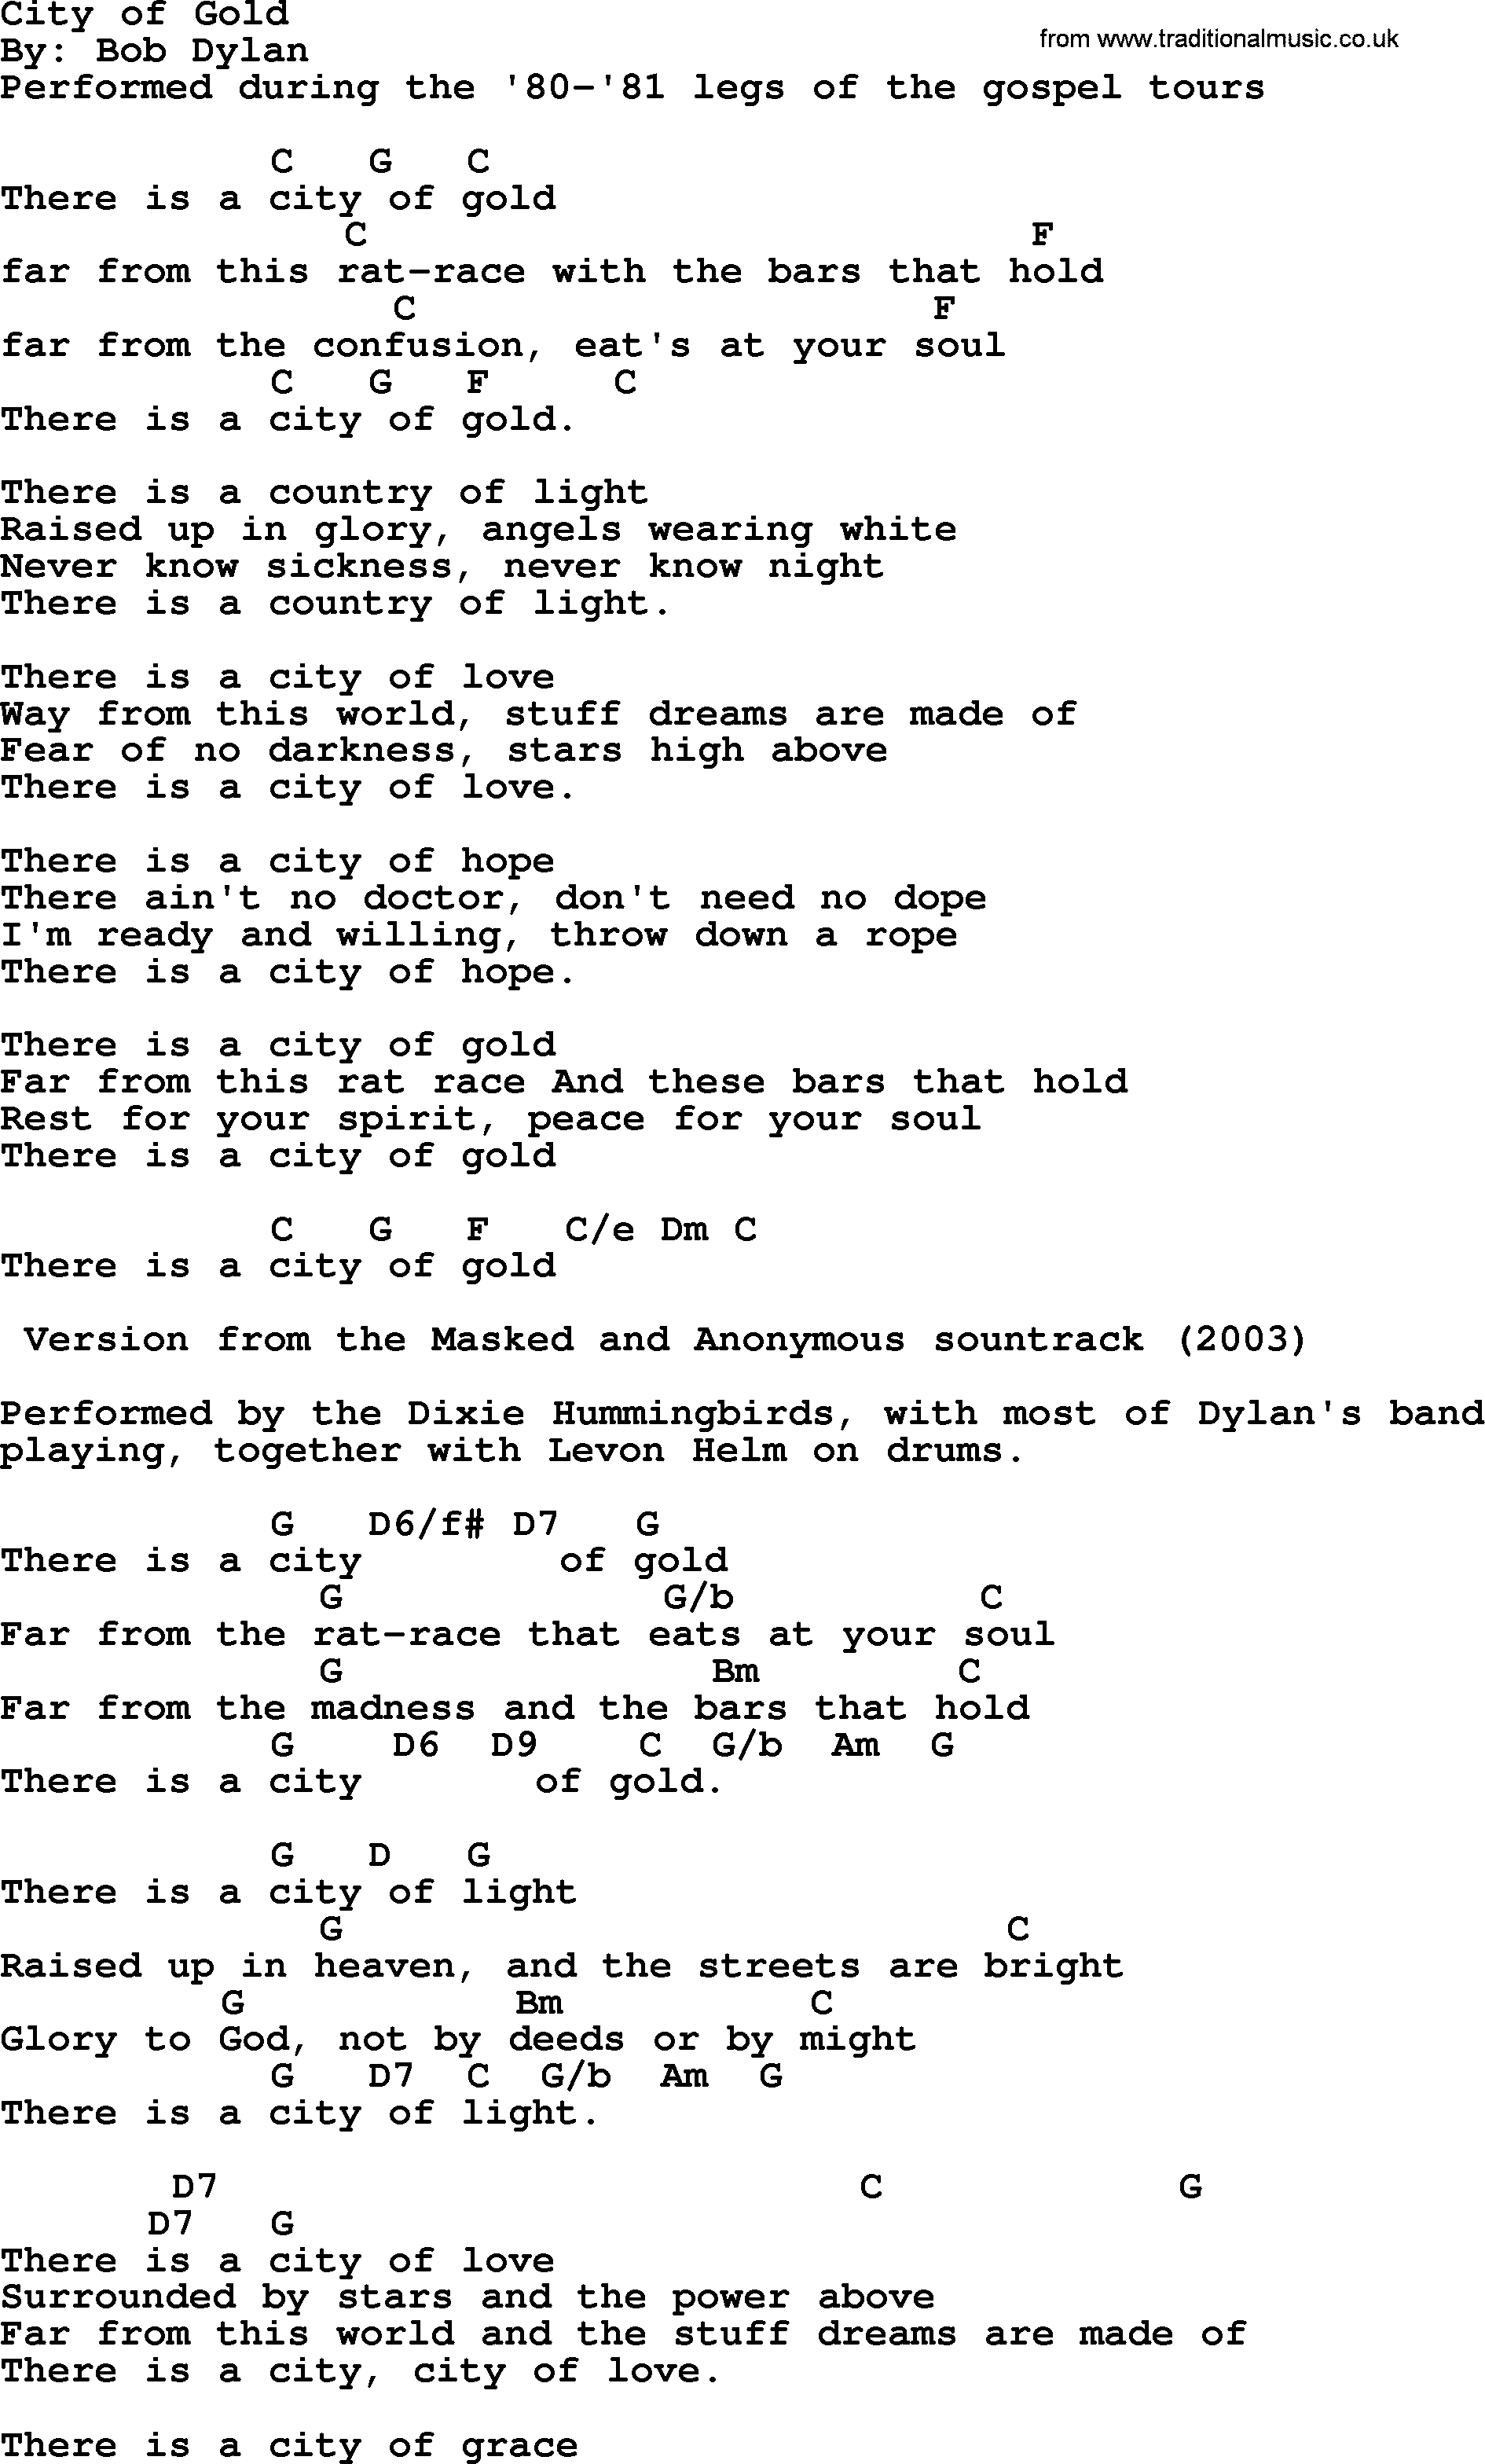 Bob Dylan song, lyrics with chords - City of Gold